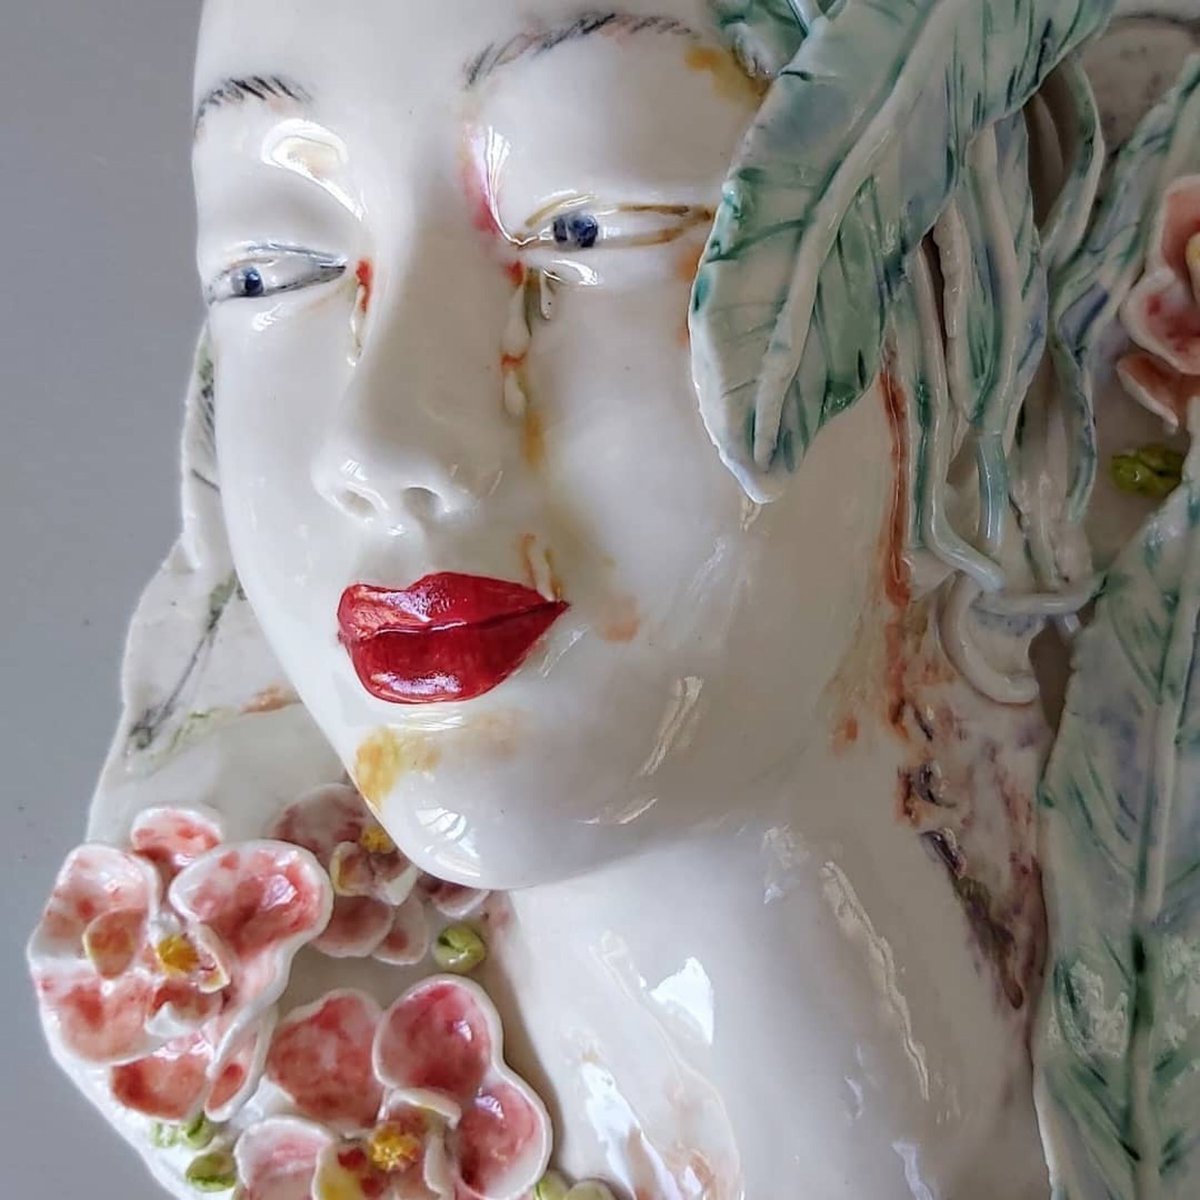 Beautiful and moving porcelain sculpture by Australian artist Yeats Gruin, 'Until the Next Teardrop Falls”

#ceramics #porcelain #porcelainsculpture #sculpture #ceramicsculpture #ceramicart #australianceramics #australianart #australianartist #ausartcollective